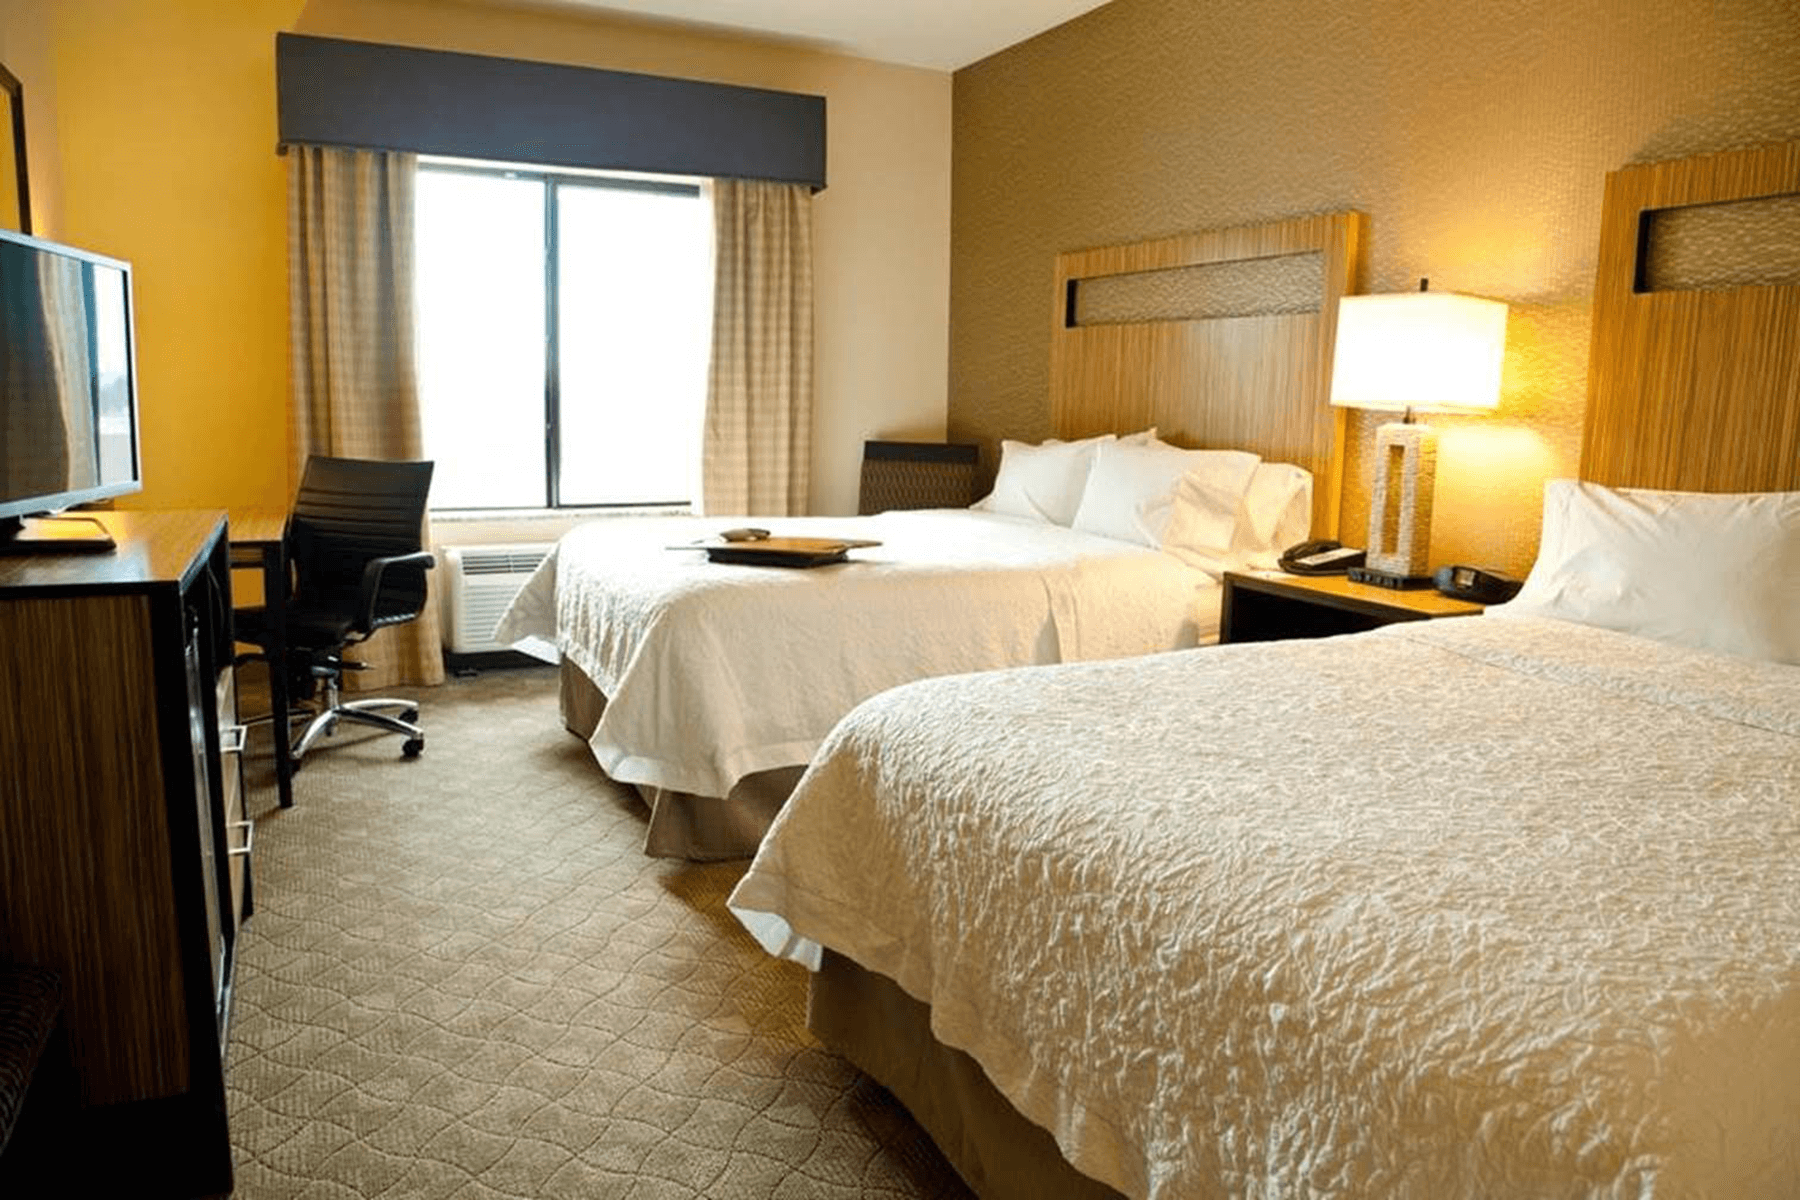  Hampton Inn and Suites Salinas room interior with two double beds 